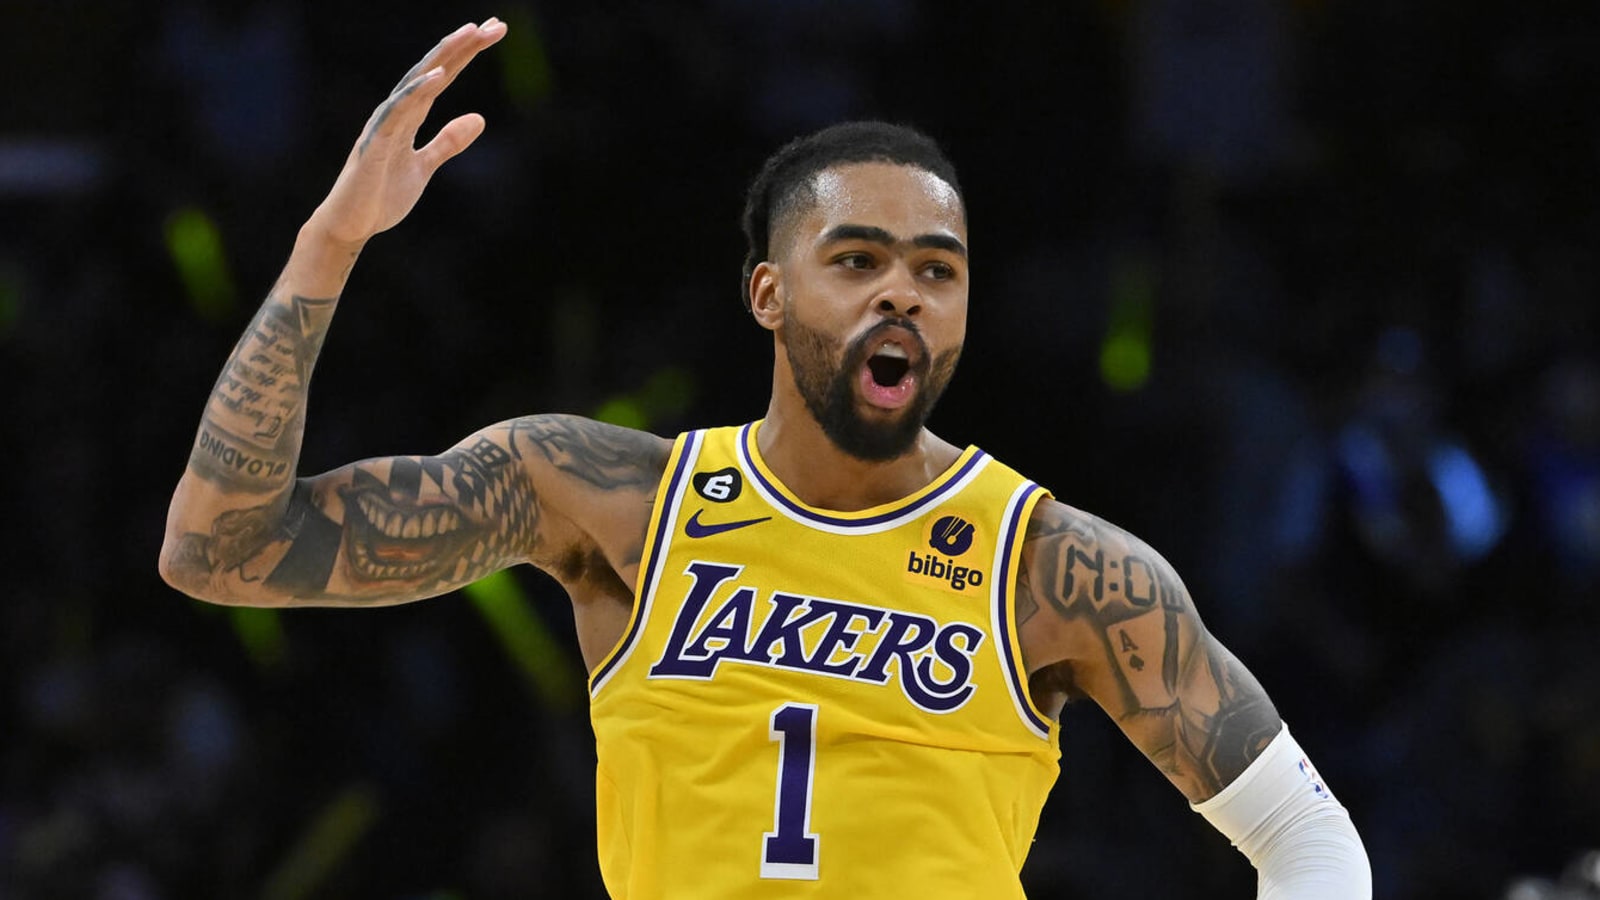 NBA: Lakers thrash Grizzlies, wrap up series in Game 6